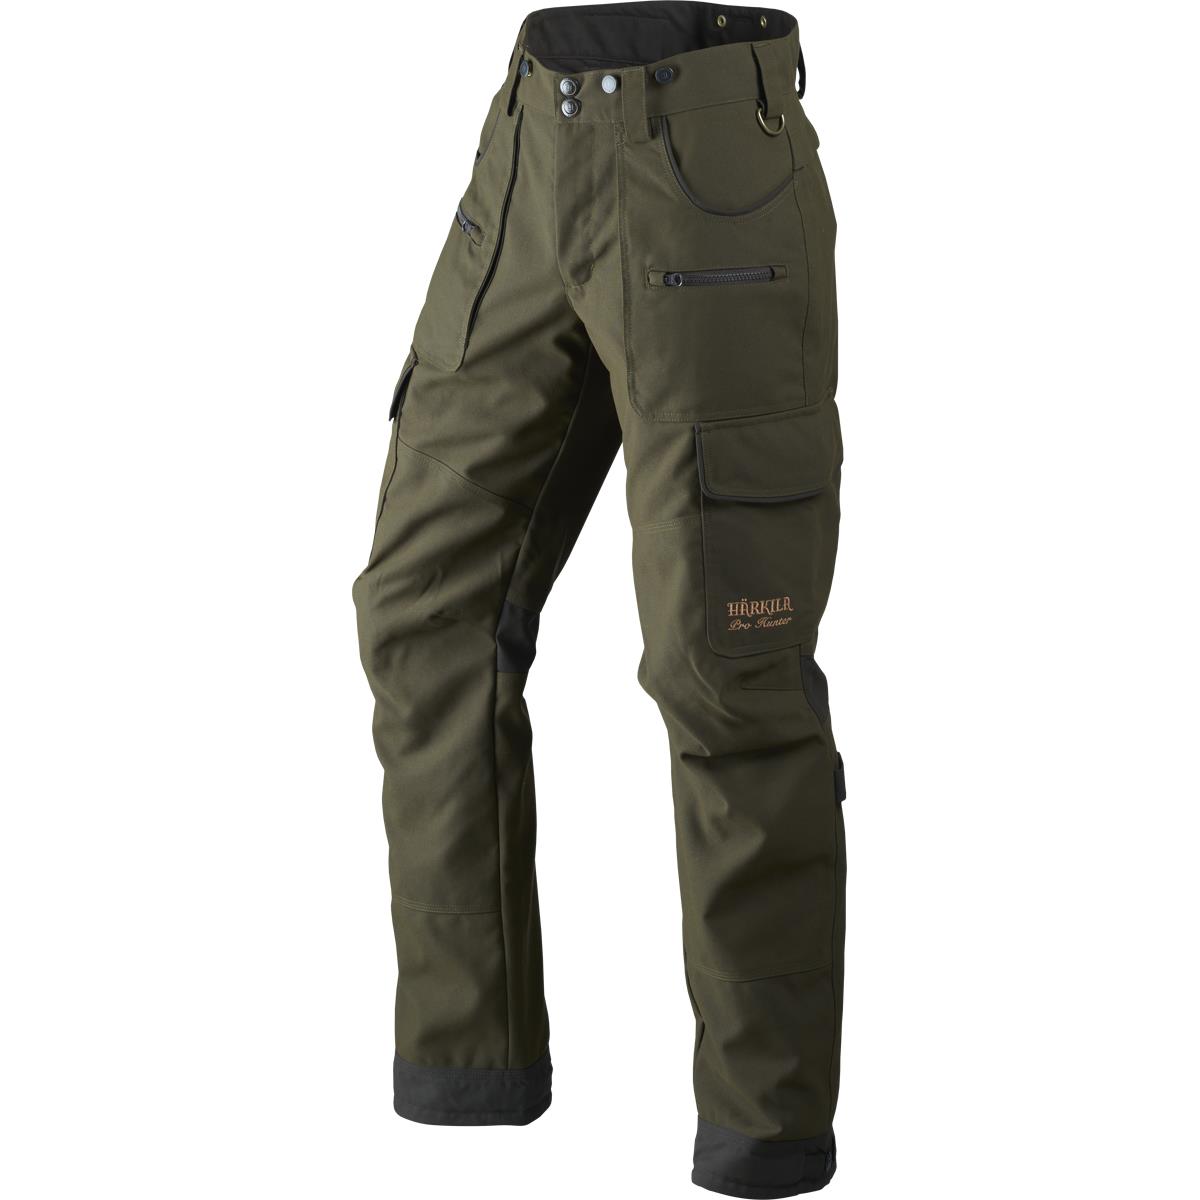 What colors and sizes are offered for Harkila Pro Hunter trousers?